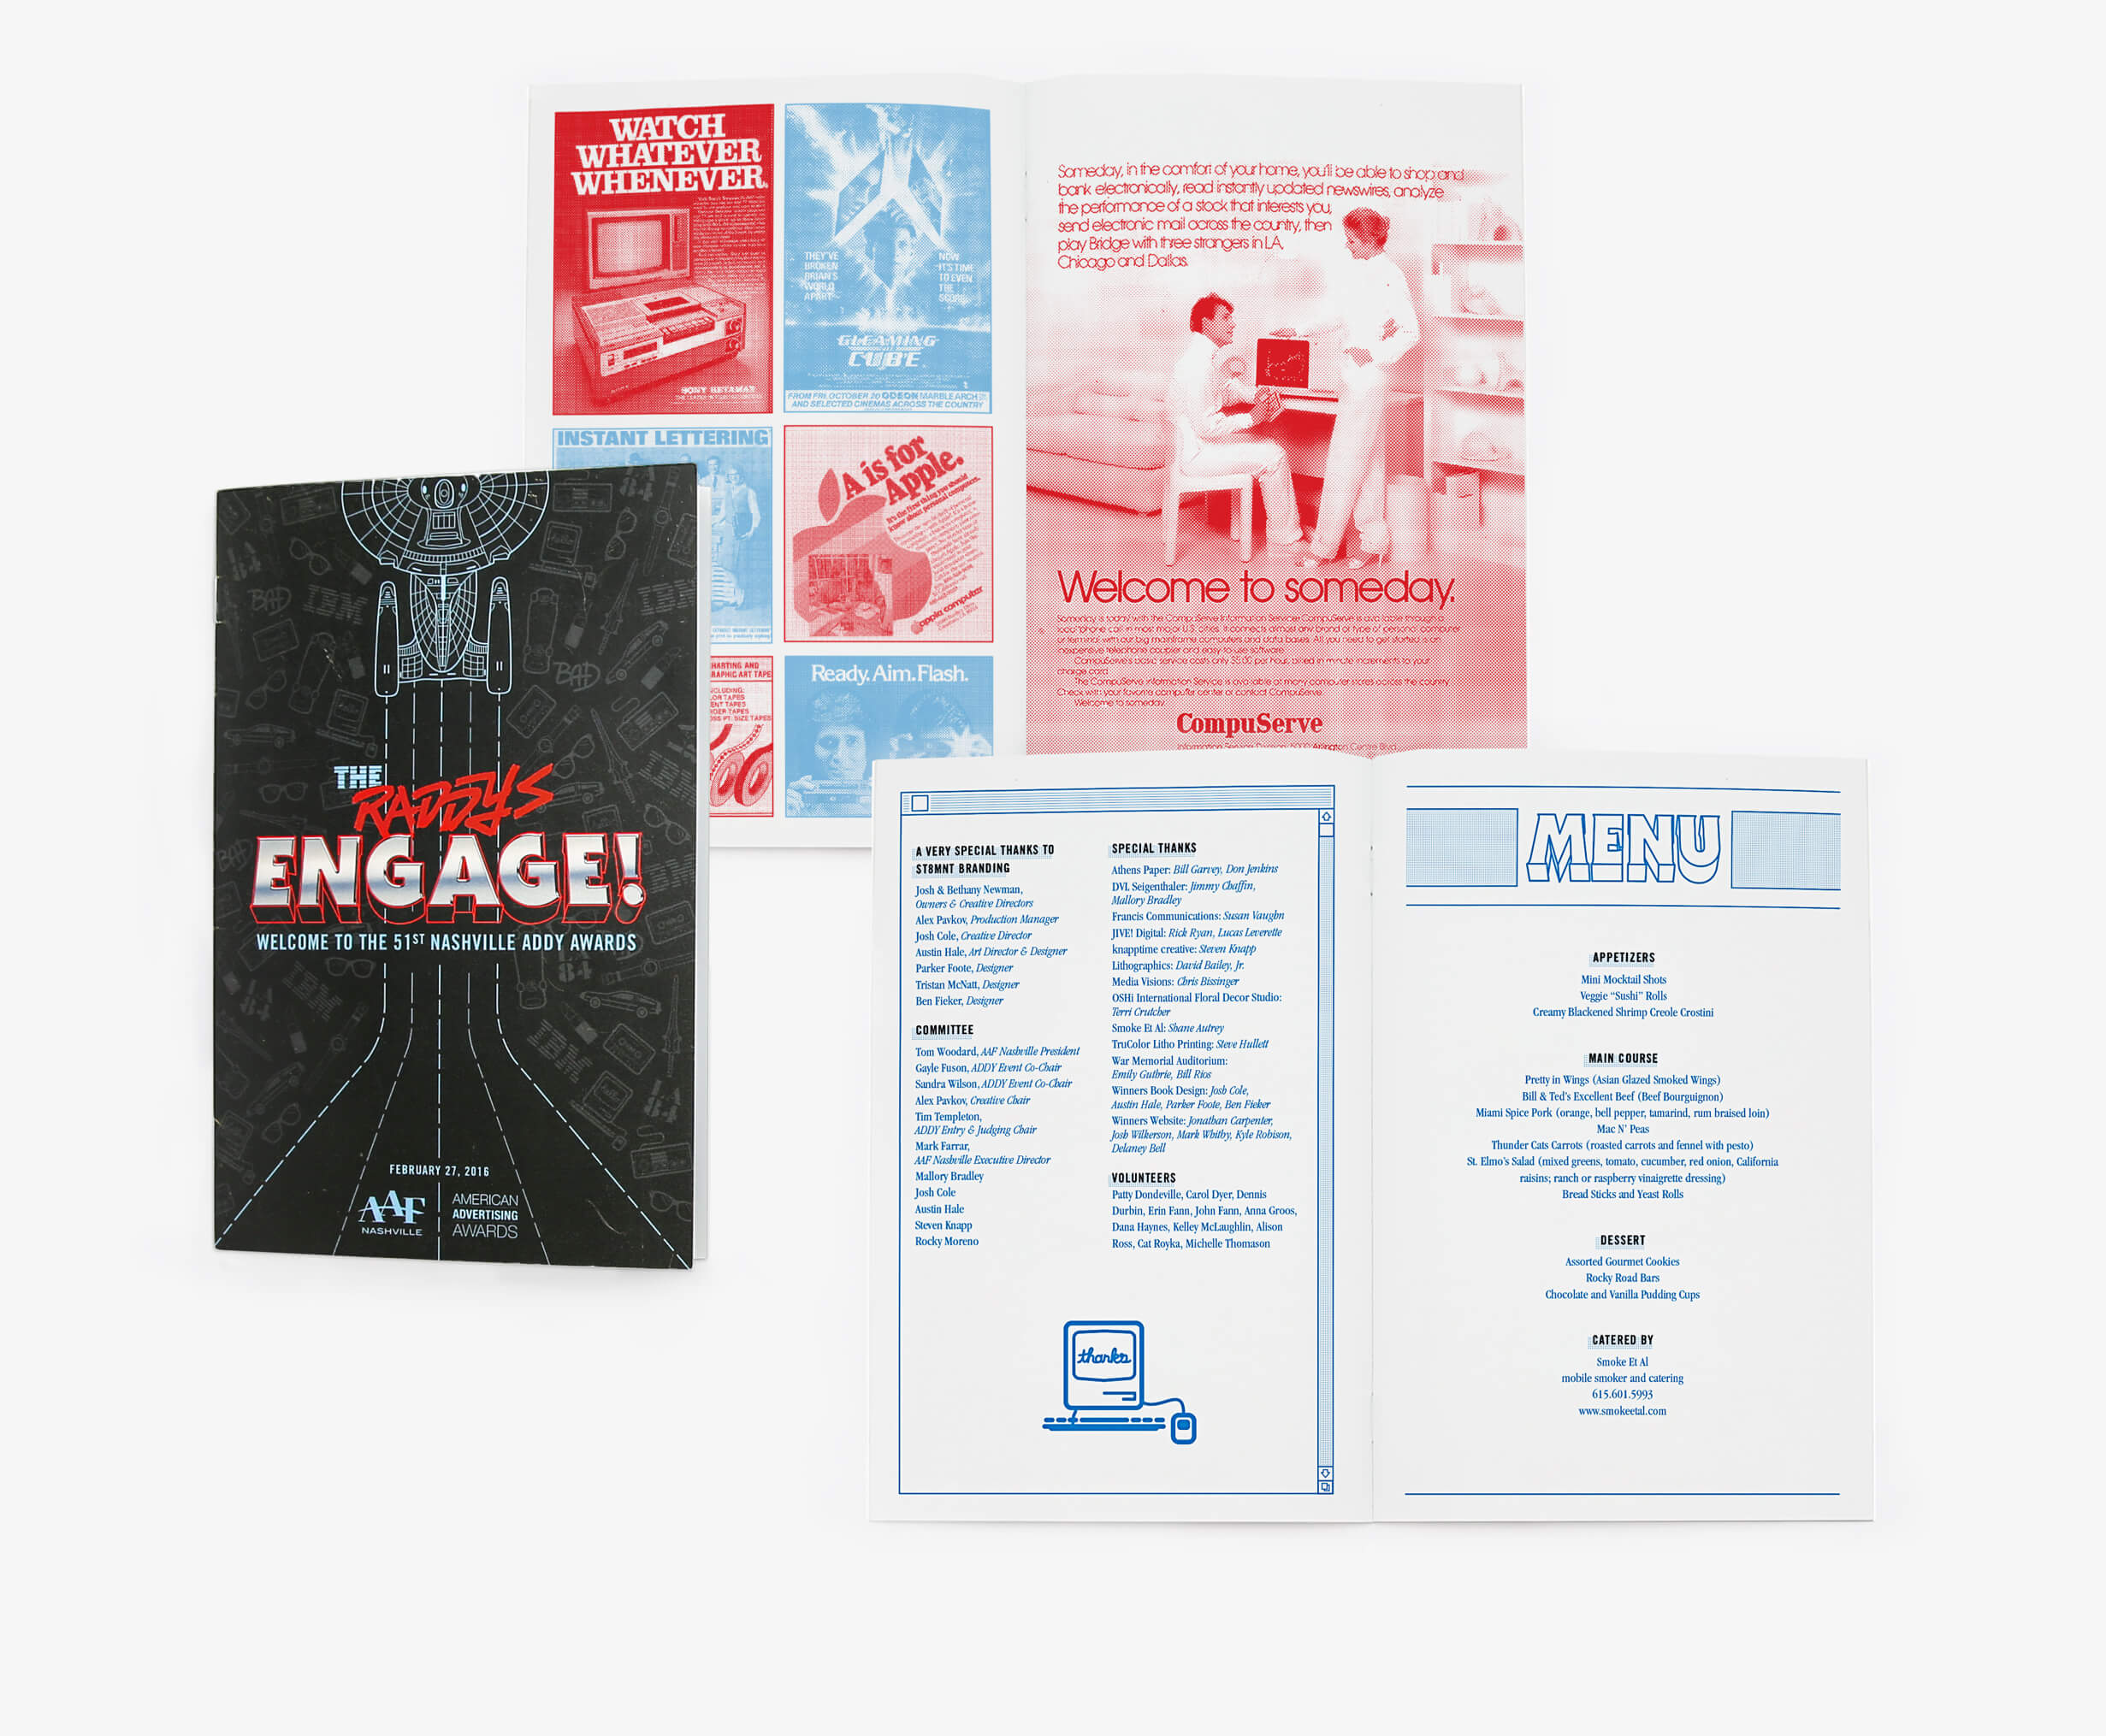 Event program publication design including illustration of branded 80s elements and typography for the 51st Nashville Addy Awards in Tennessee